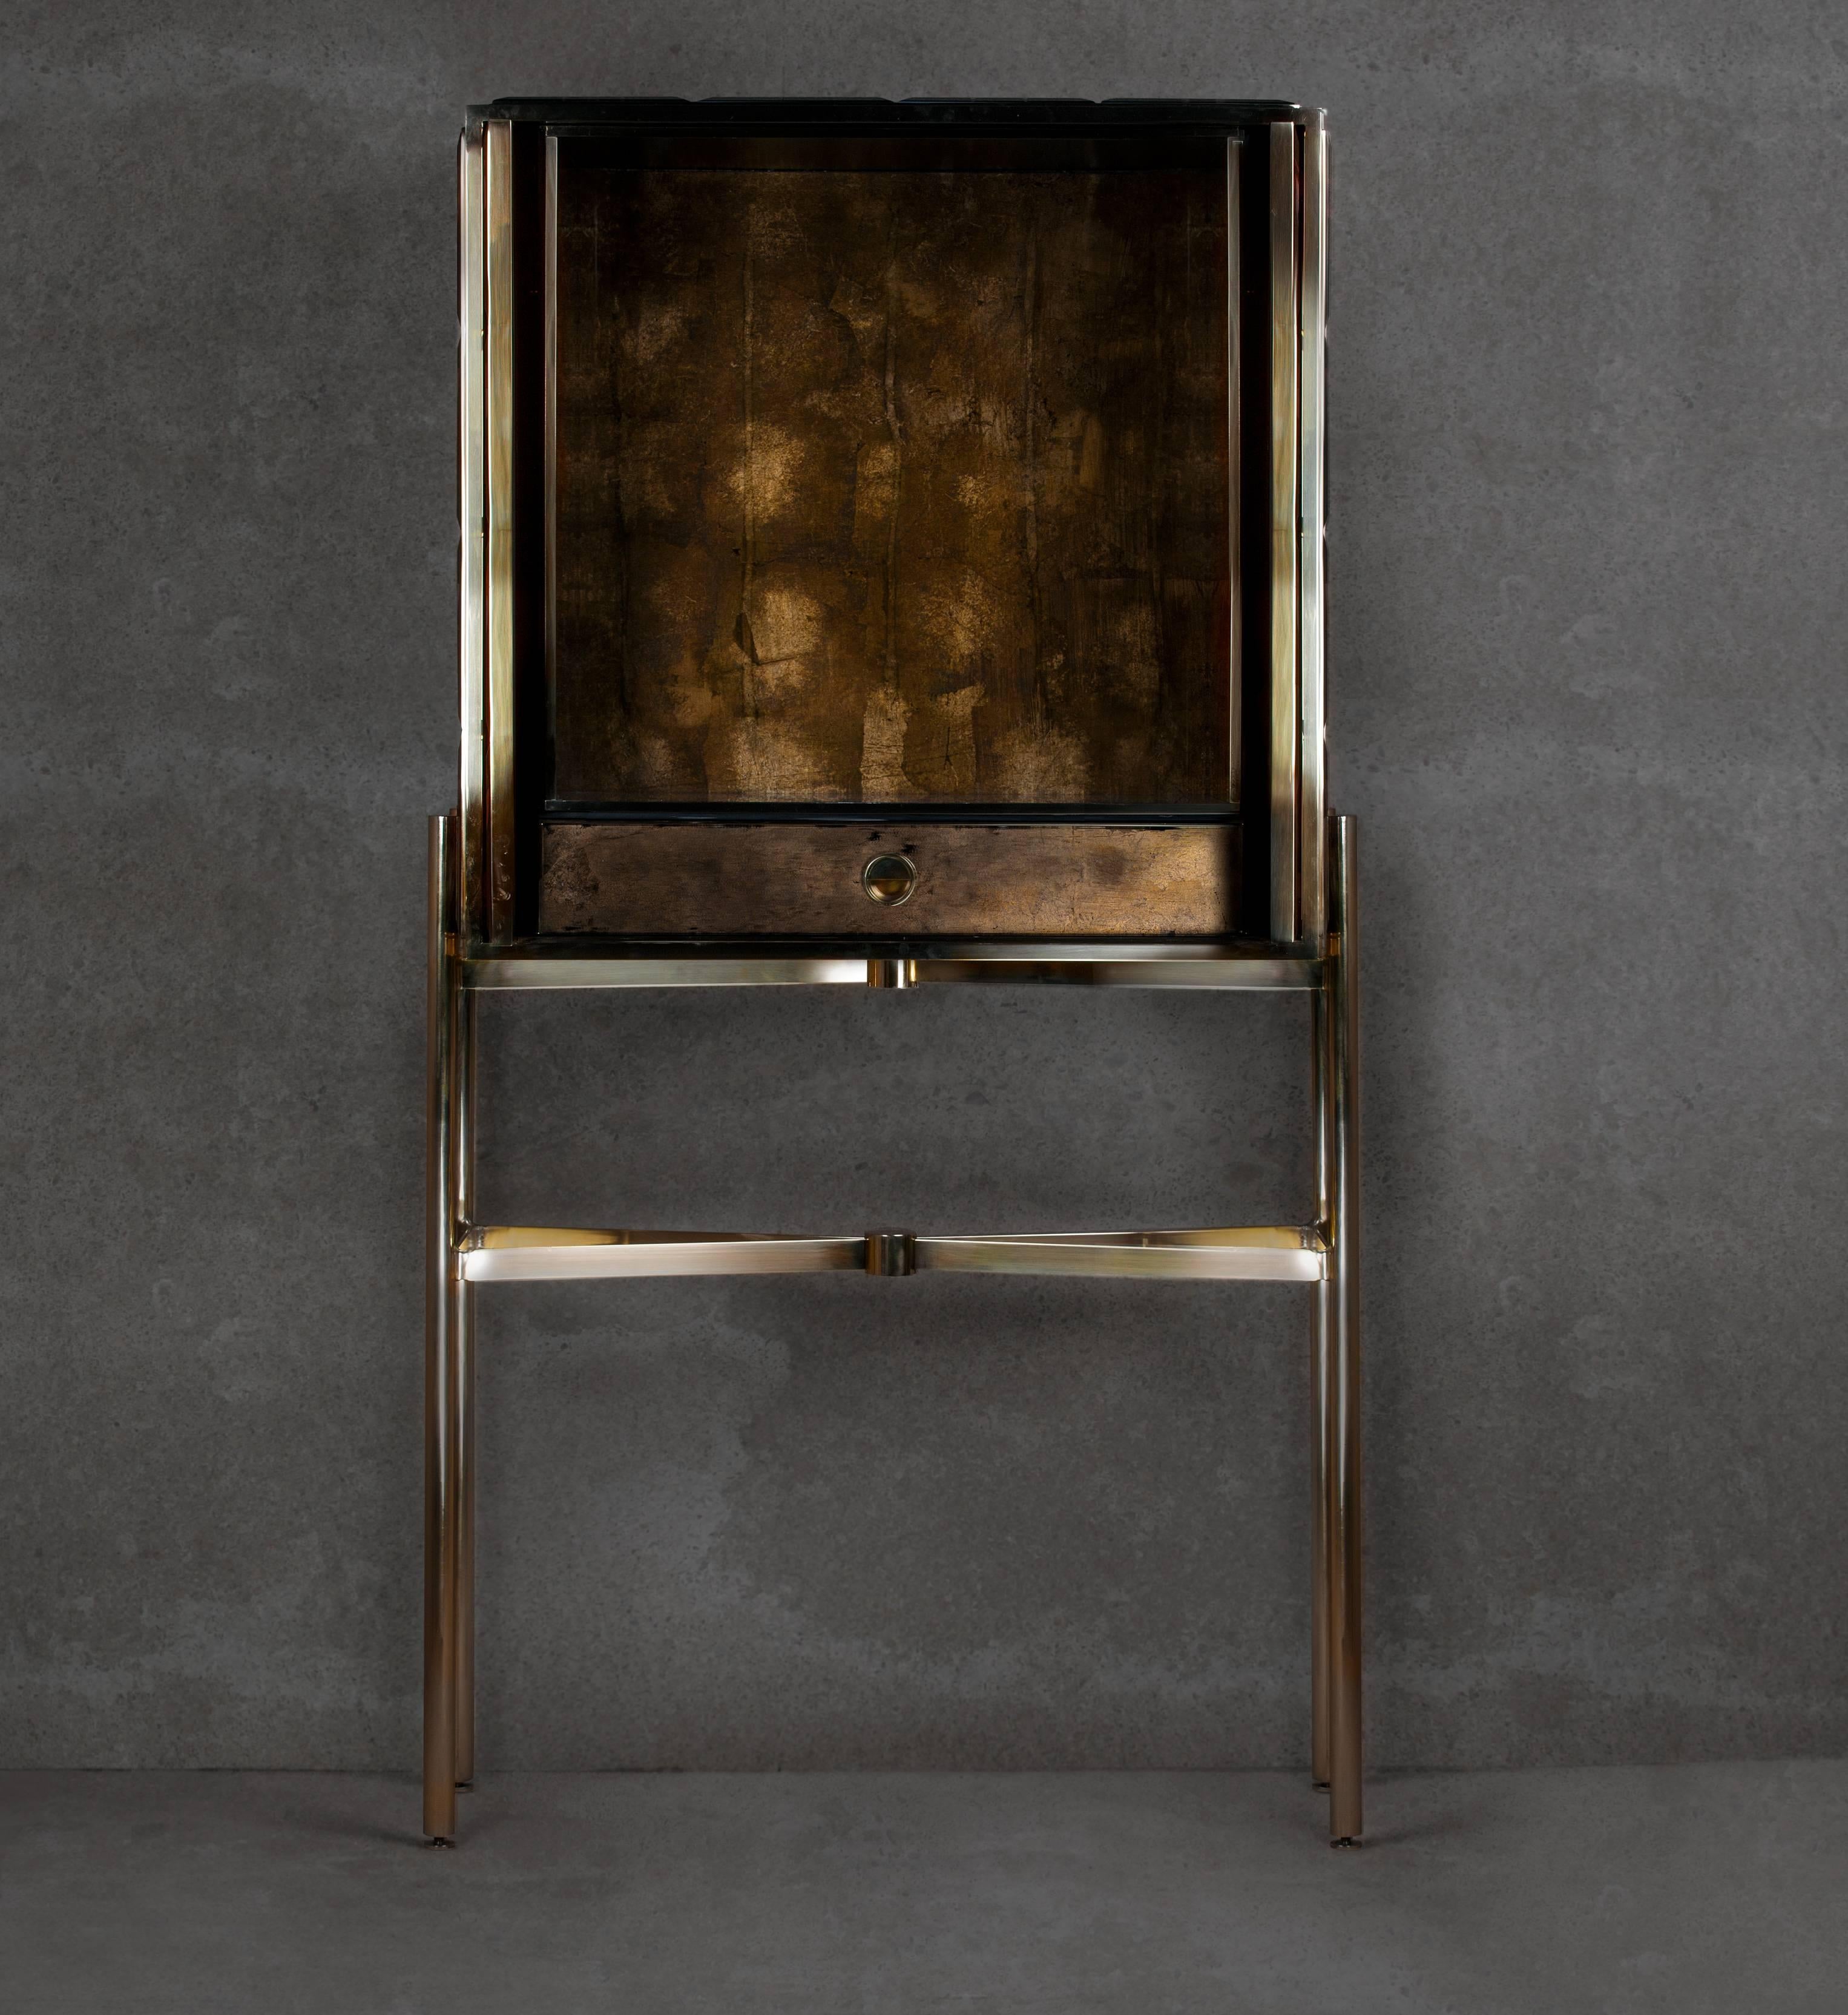 Cabinet I and Cabinet II are inspired by the late medieval and renaissance par excellence Spanish furniture, the Bargueño , one of the most appreciated pieces of furniture across European courts during that time. Made out of the best materials like